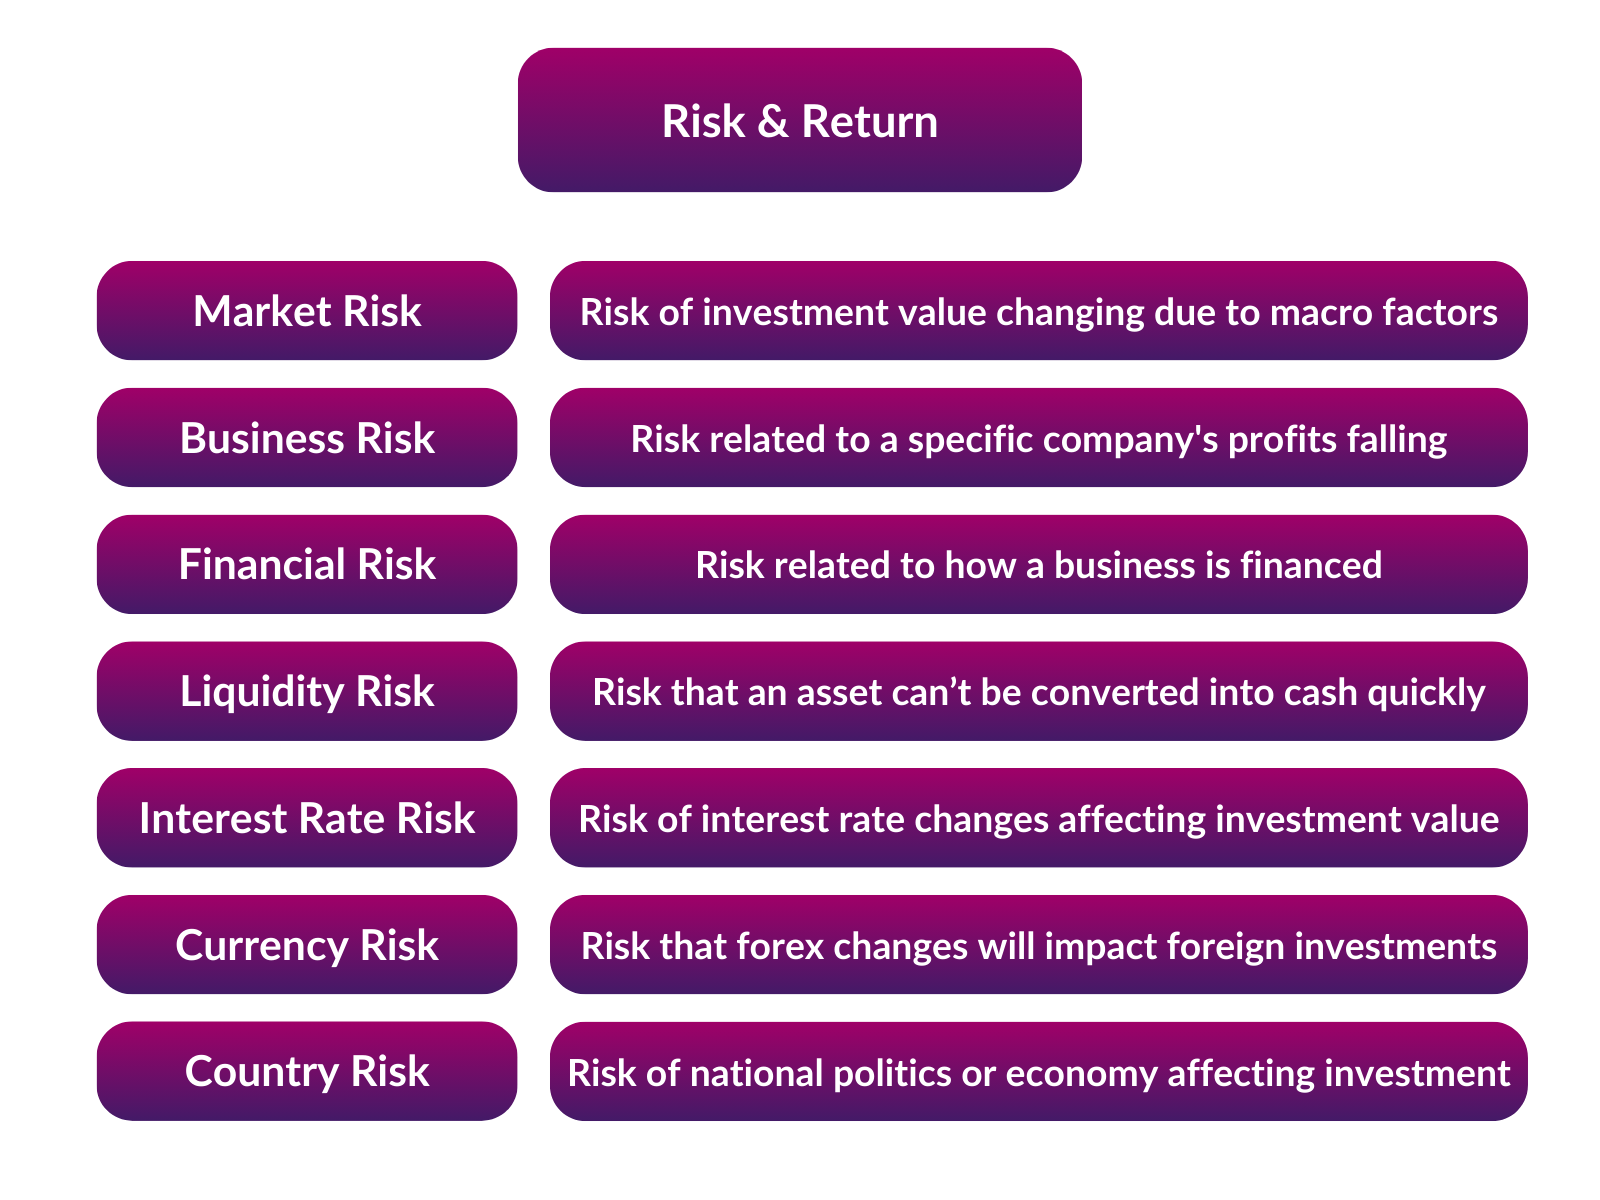 Diagram showing definitions of different investment risks